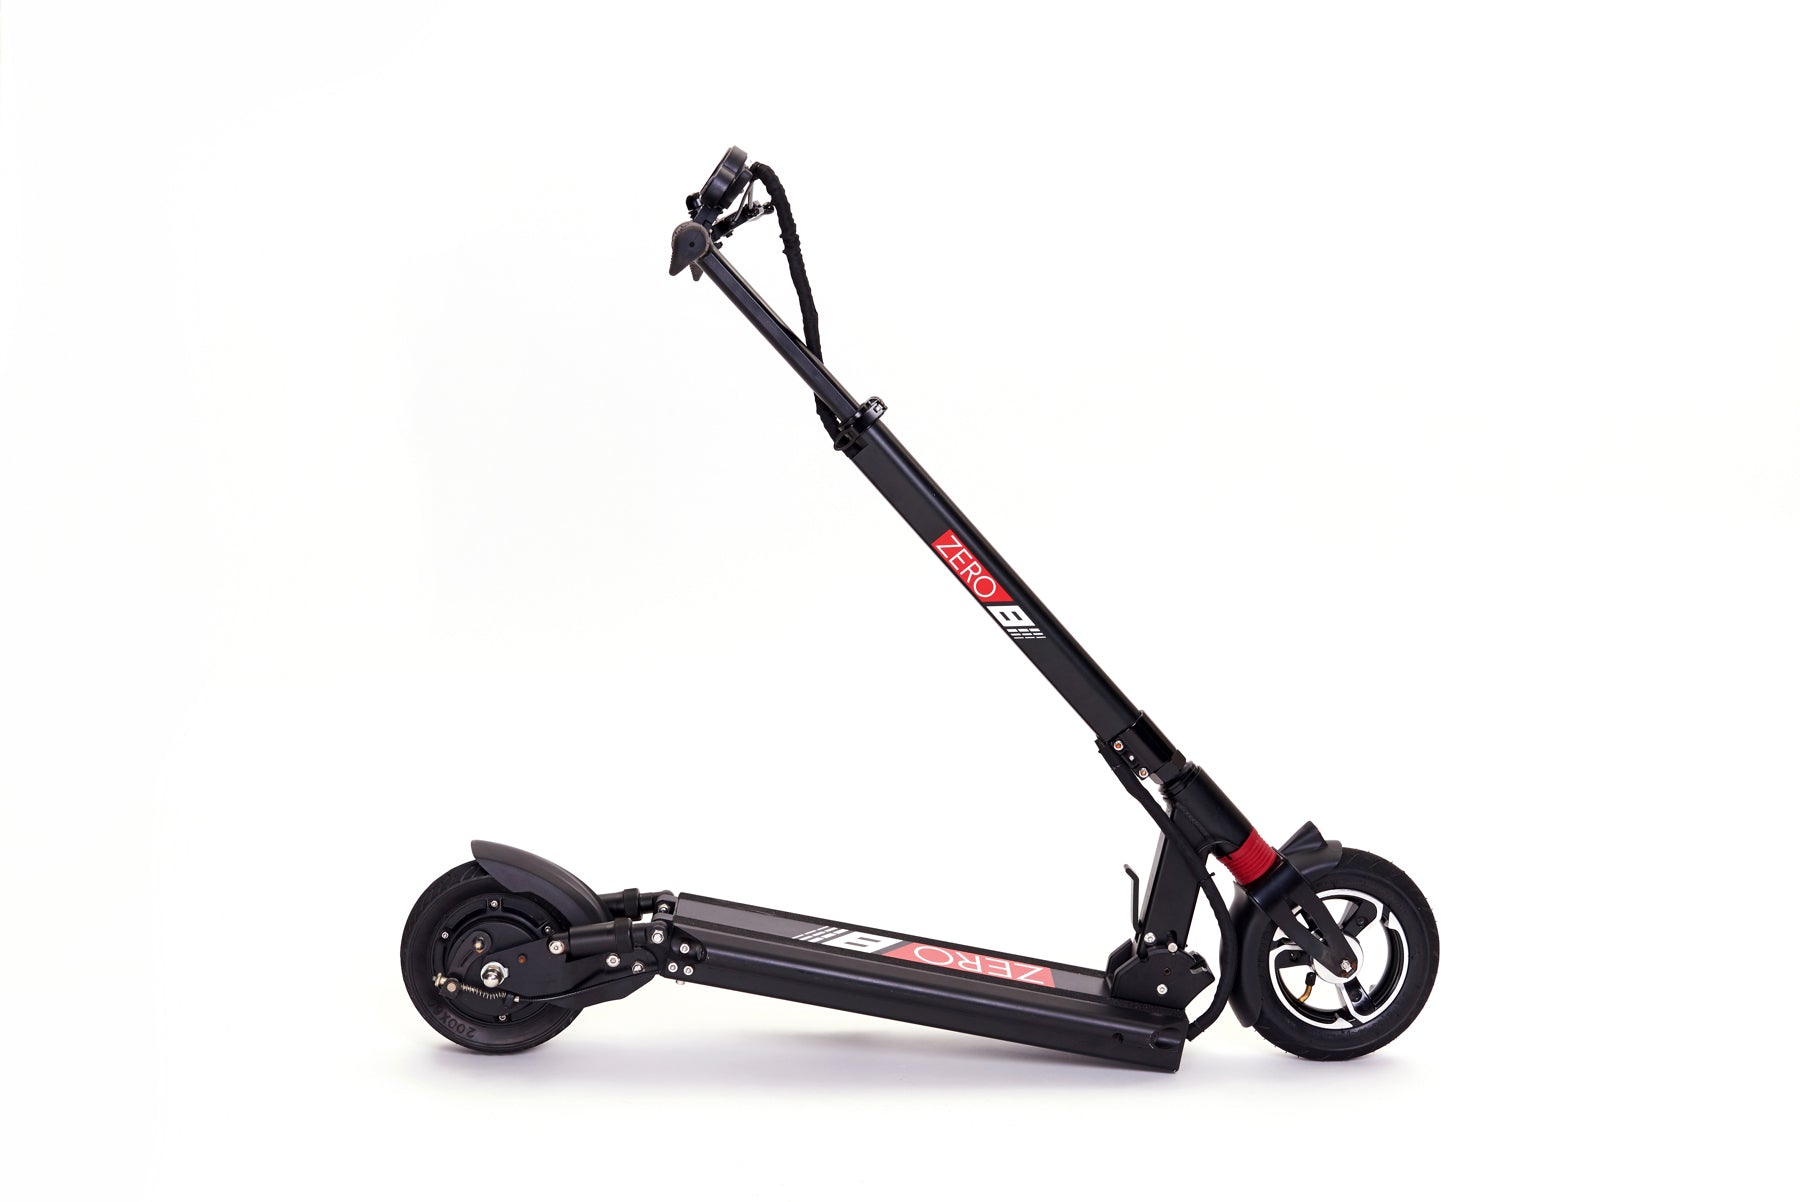 nødsituation Omkostningsprocent boykot Zero 8 Electric Scooter — Falcon Go